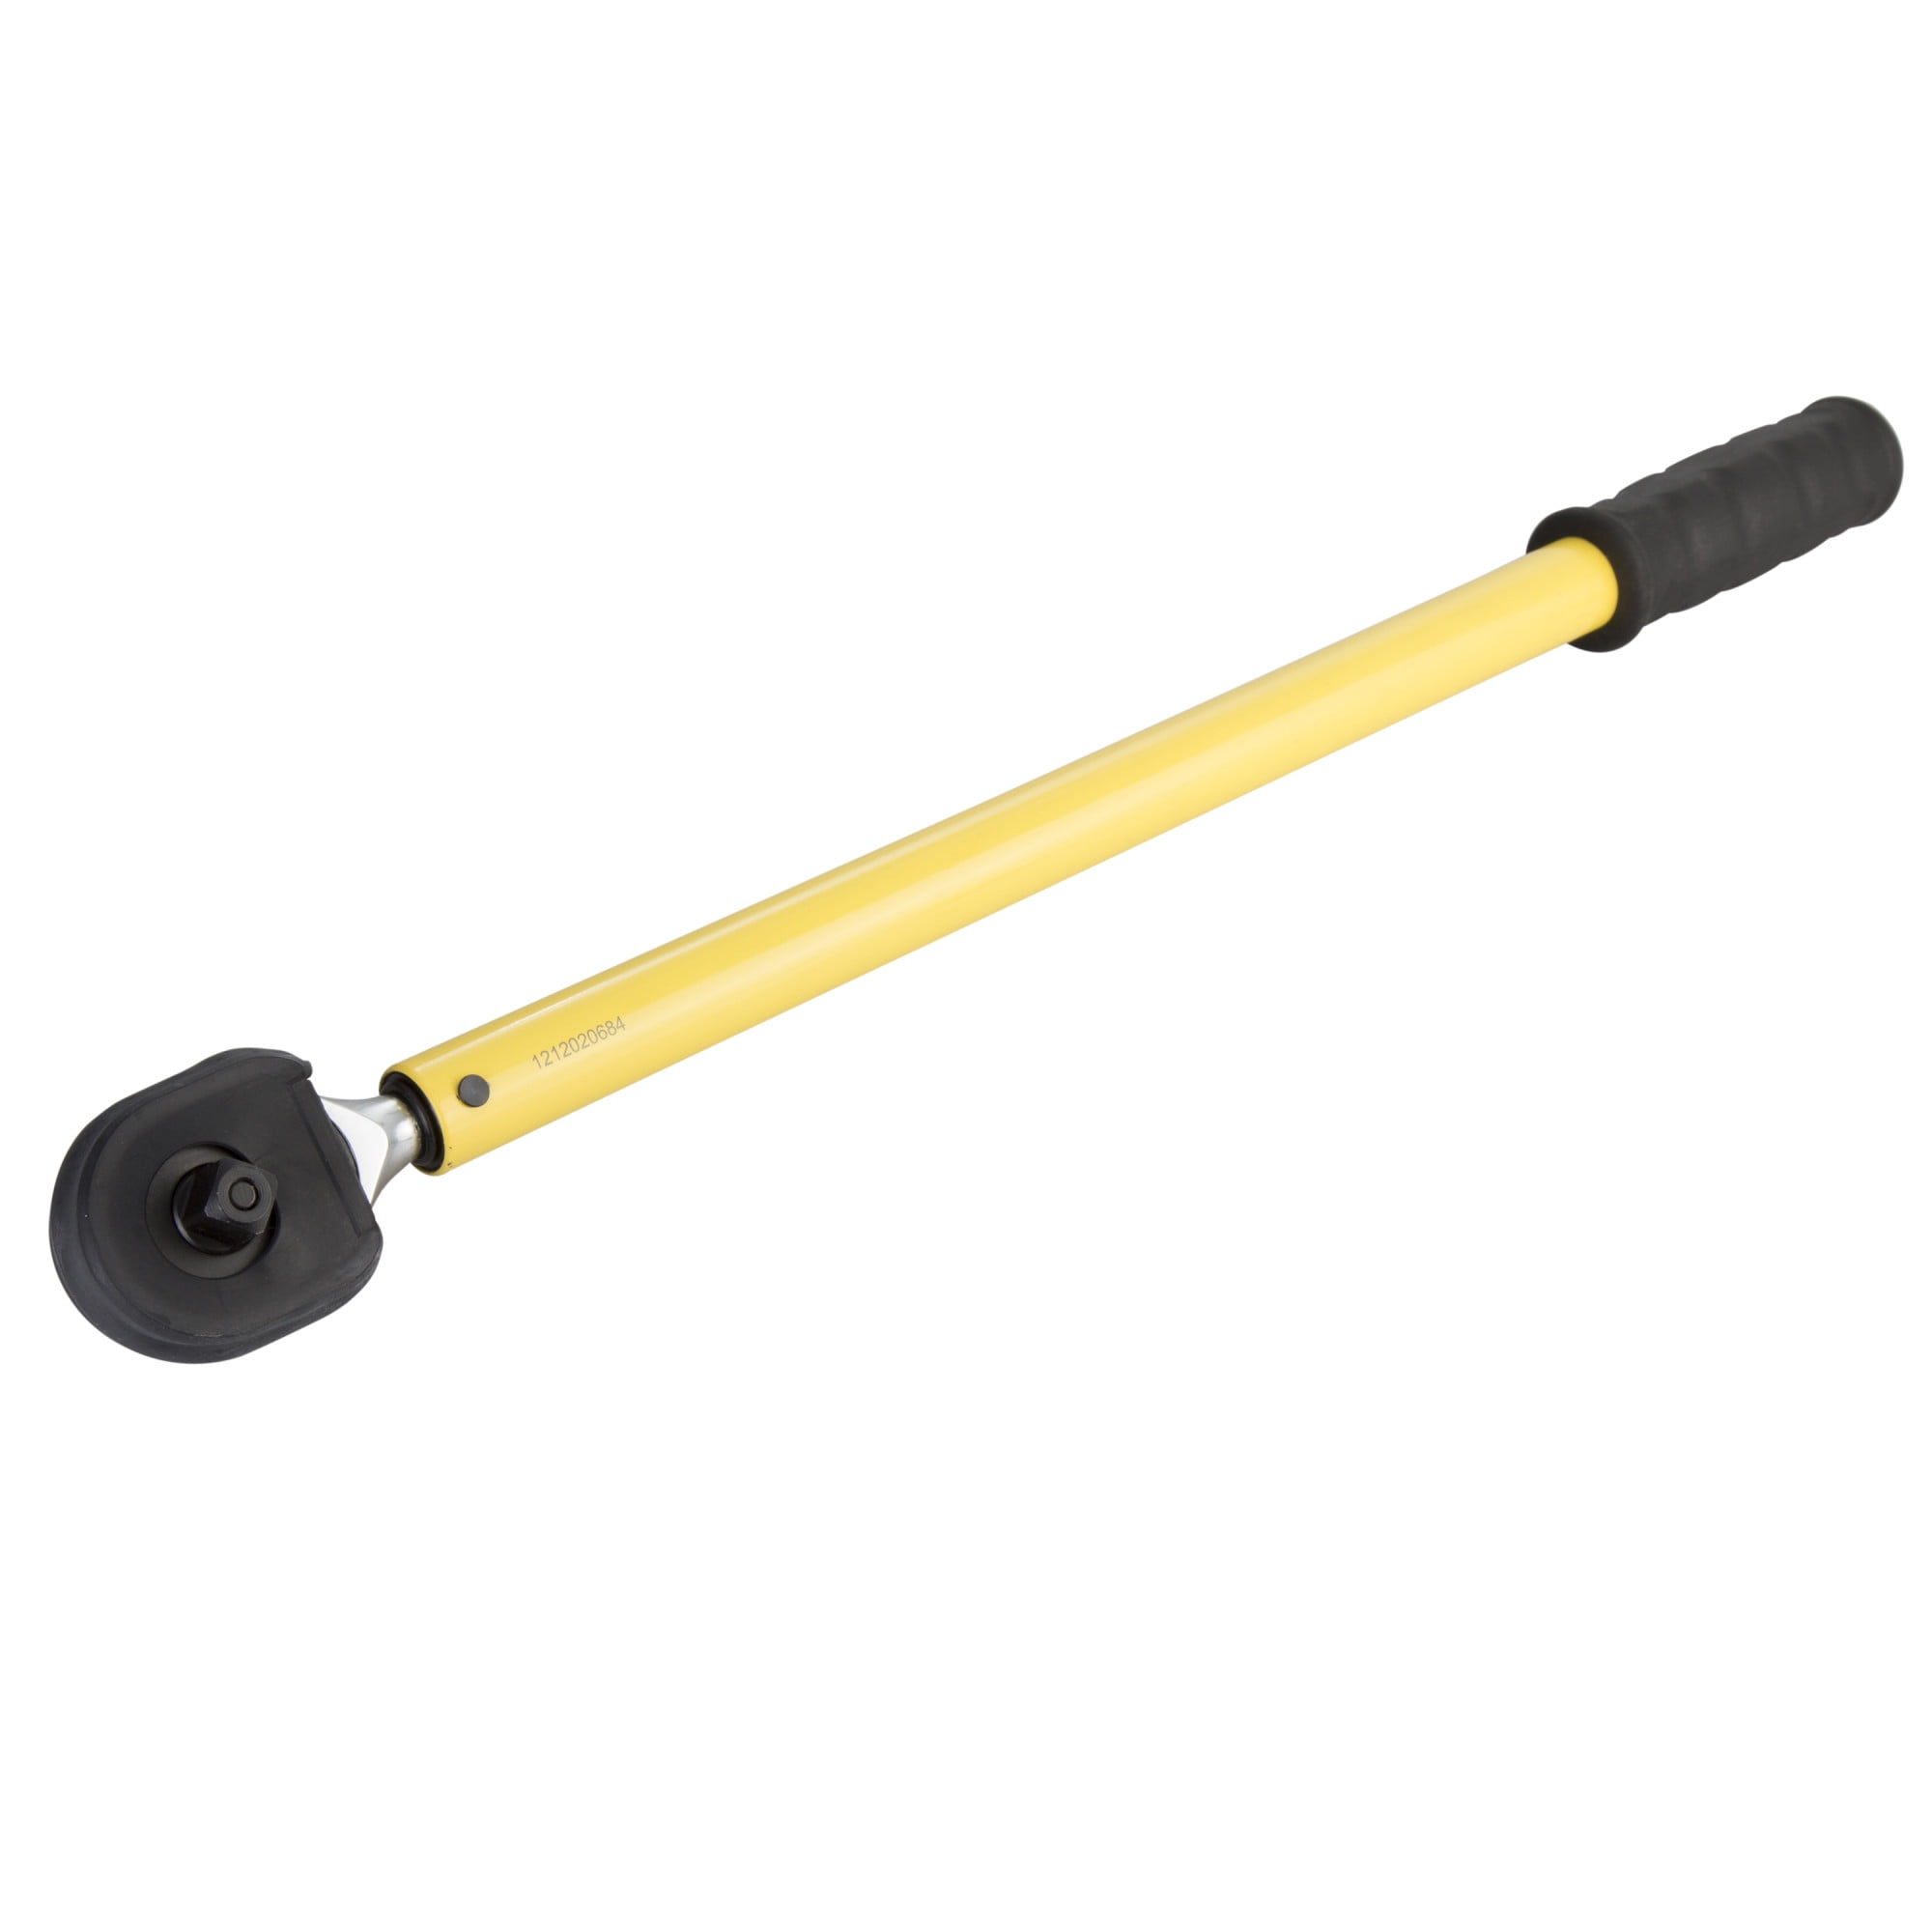 STEELMAN 96158 Yellow 1/2 in Drive 100 ft LB Pre-set Ratcheting Torque Wrench 